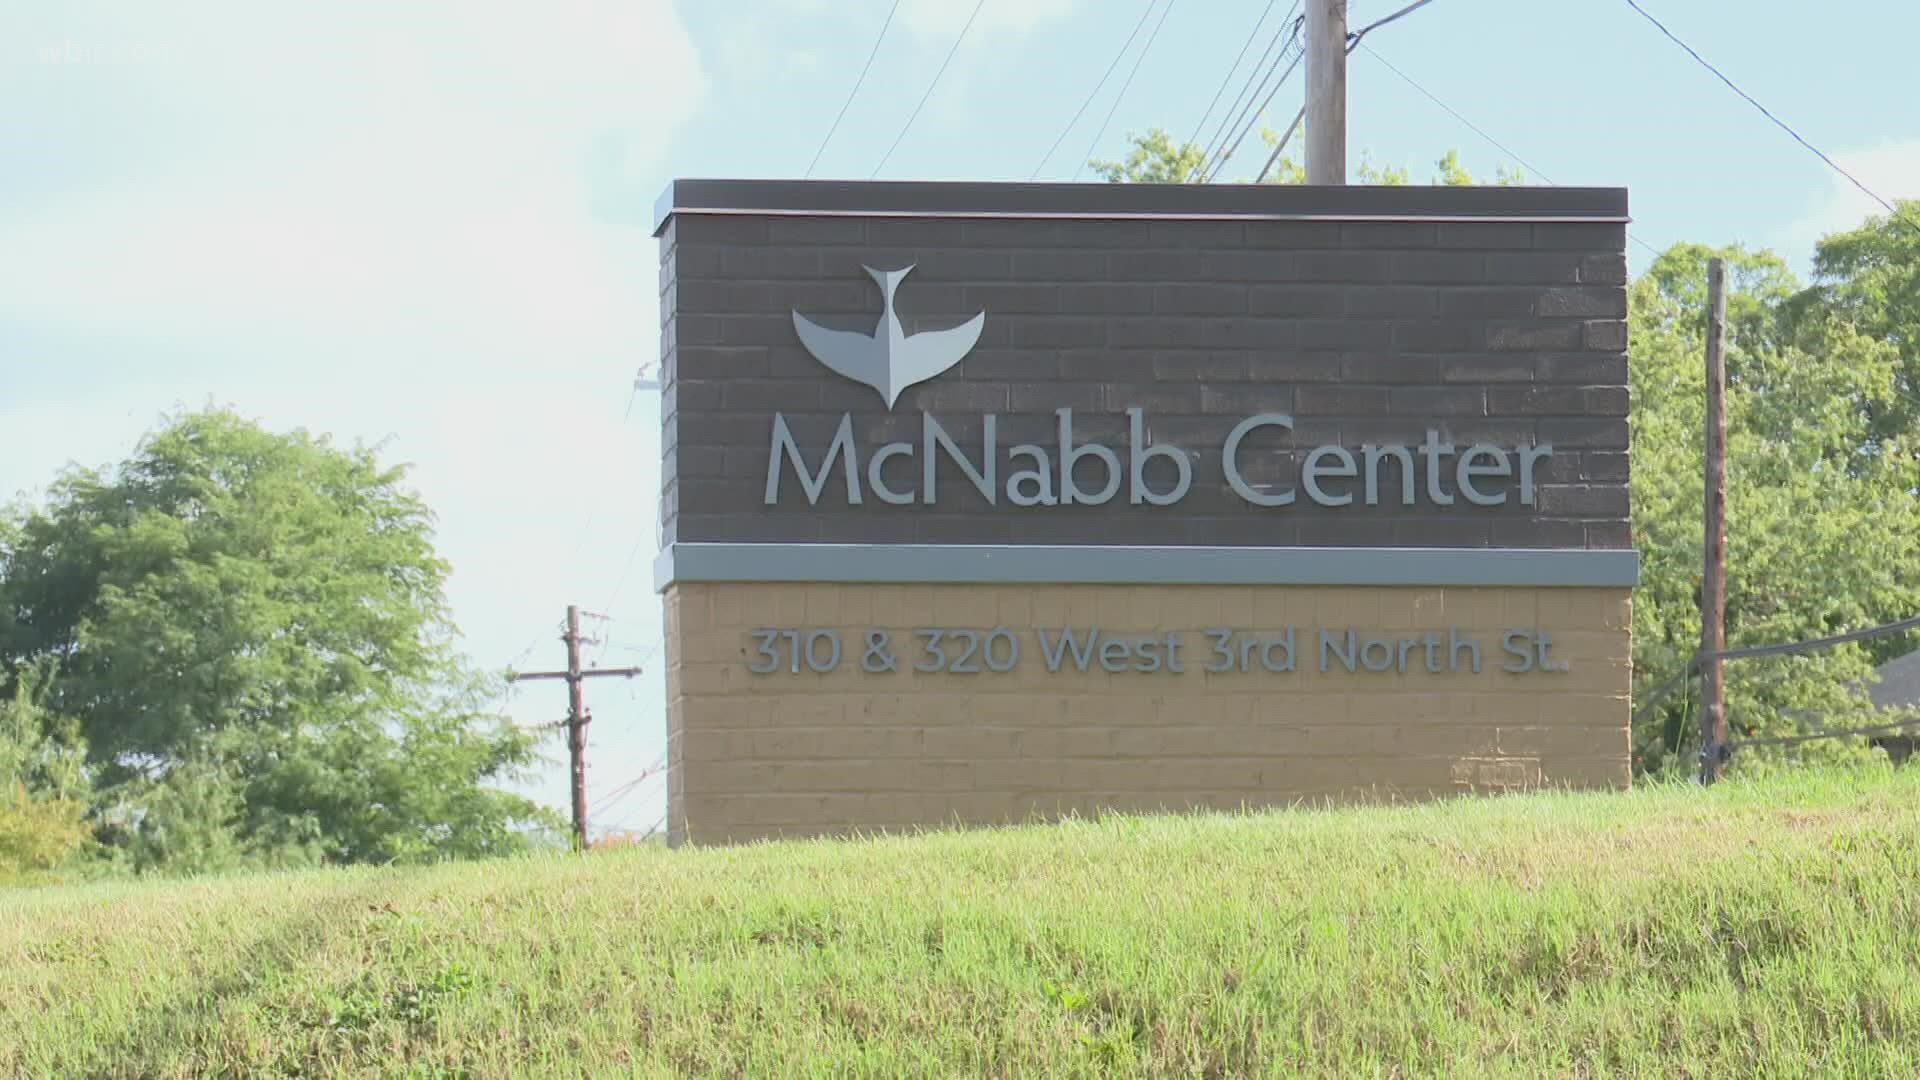 The McNabb Center also offers a family walk-in center.